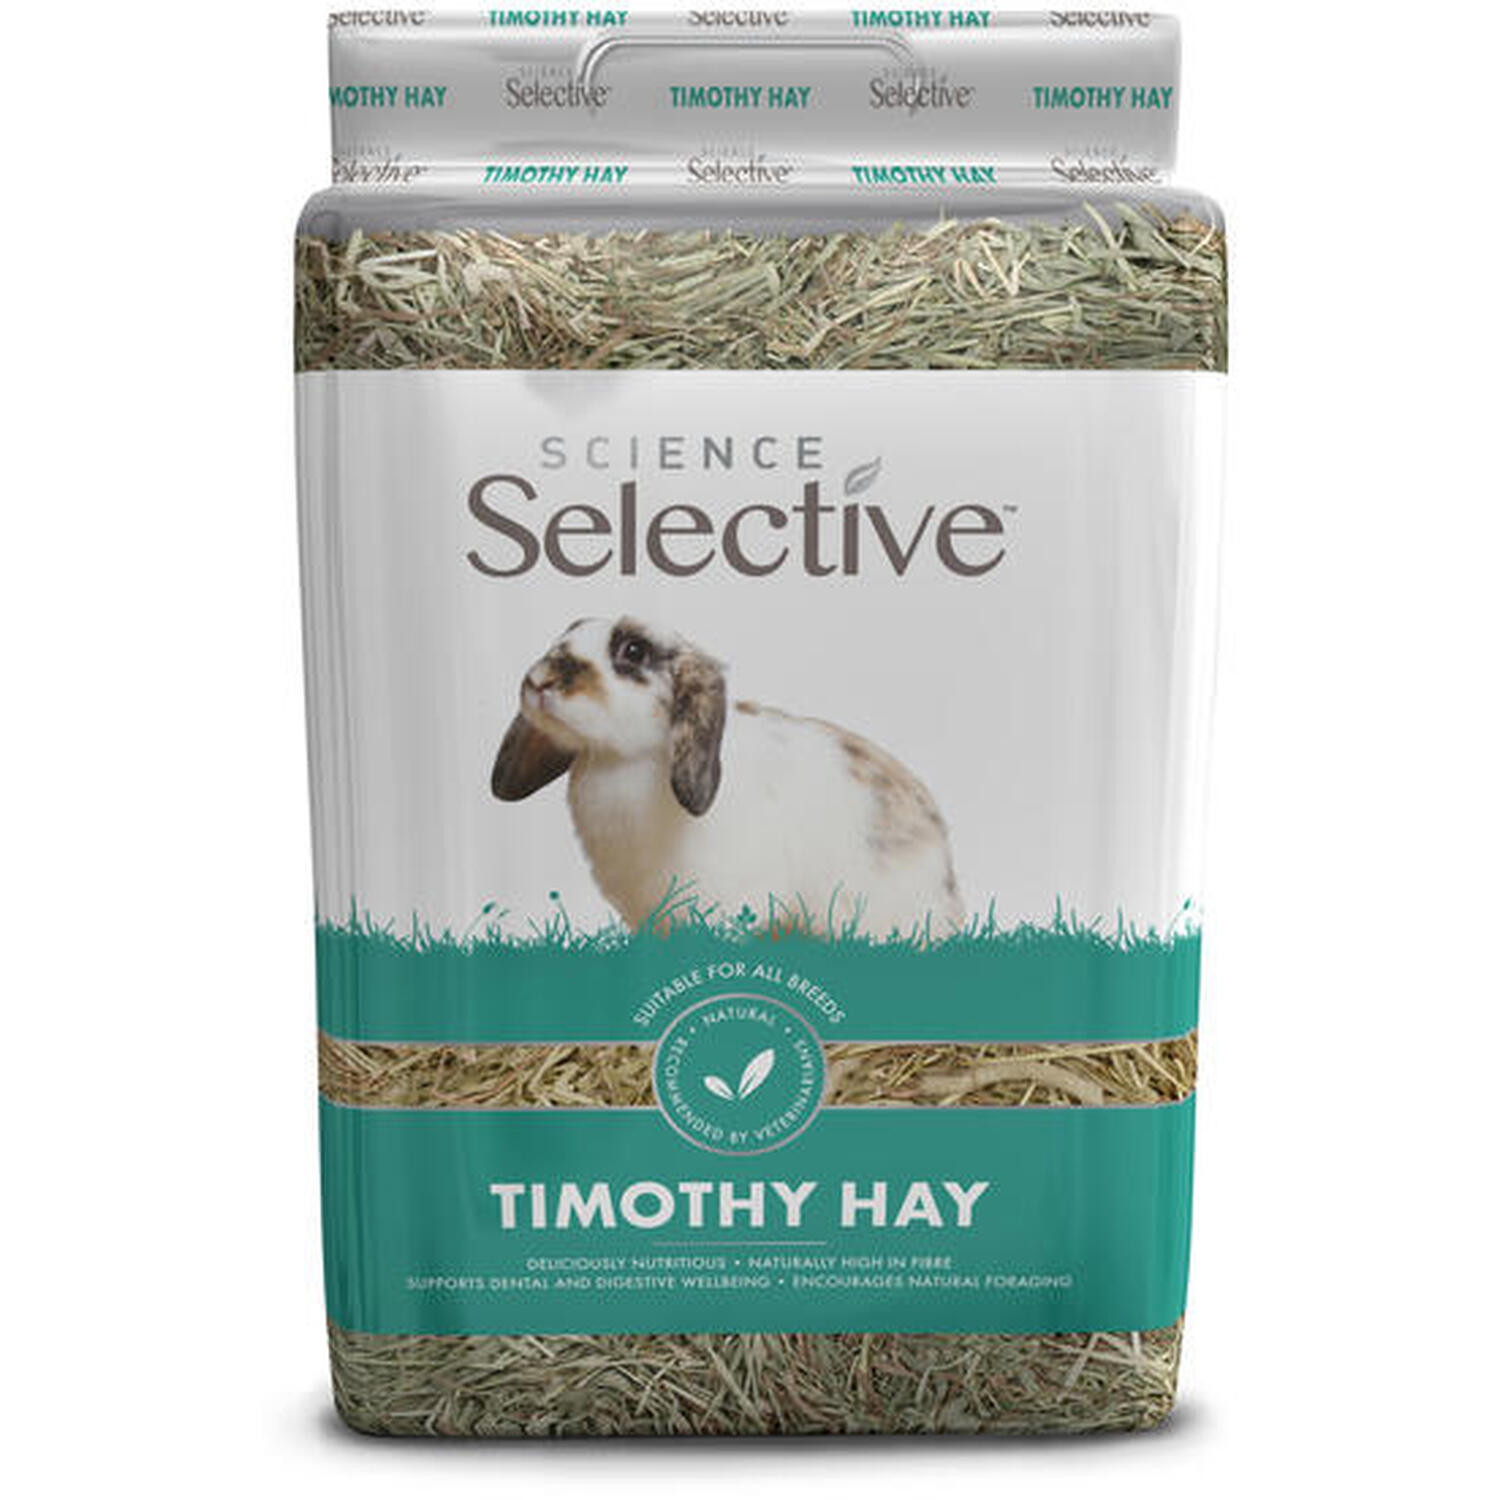 Science Selective Timothy Hay 1.5kg Image 1